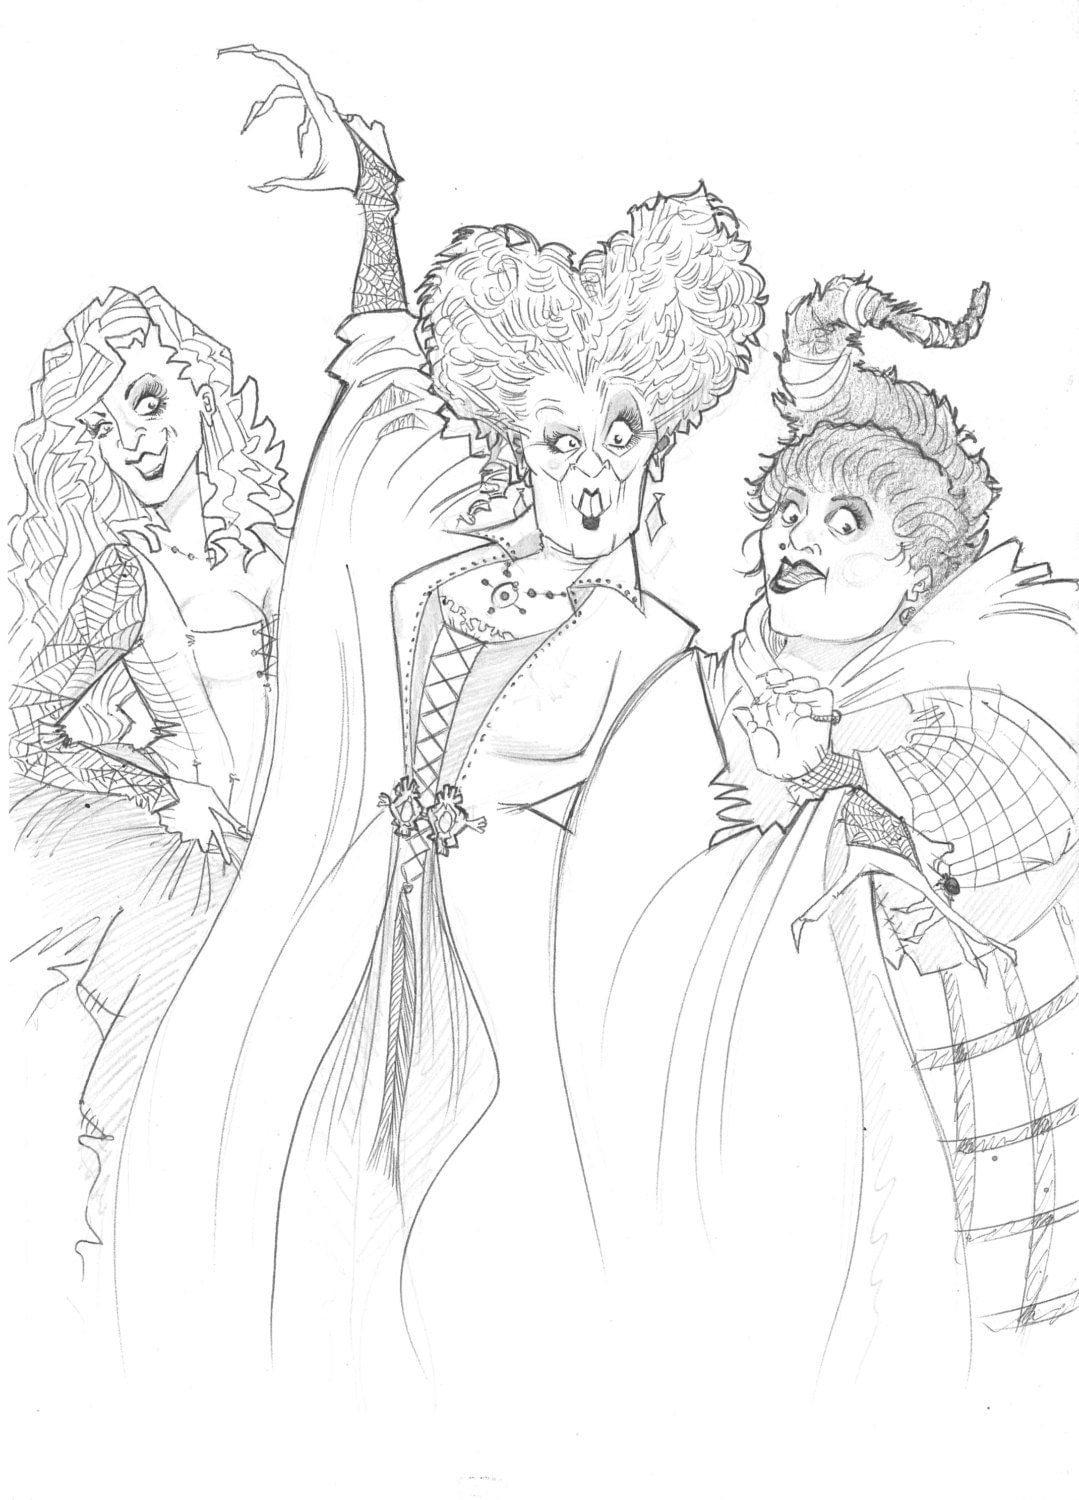 Printable Hocus Pocus Coloring Pages - Printable Hocus Pocus Coloring Page